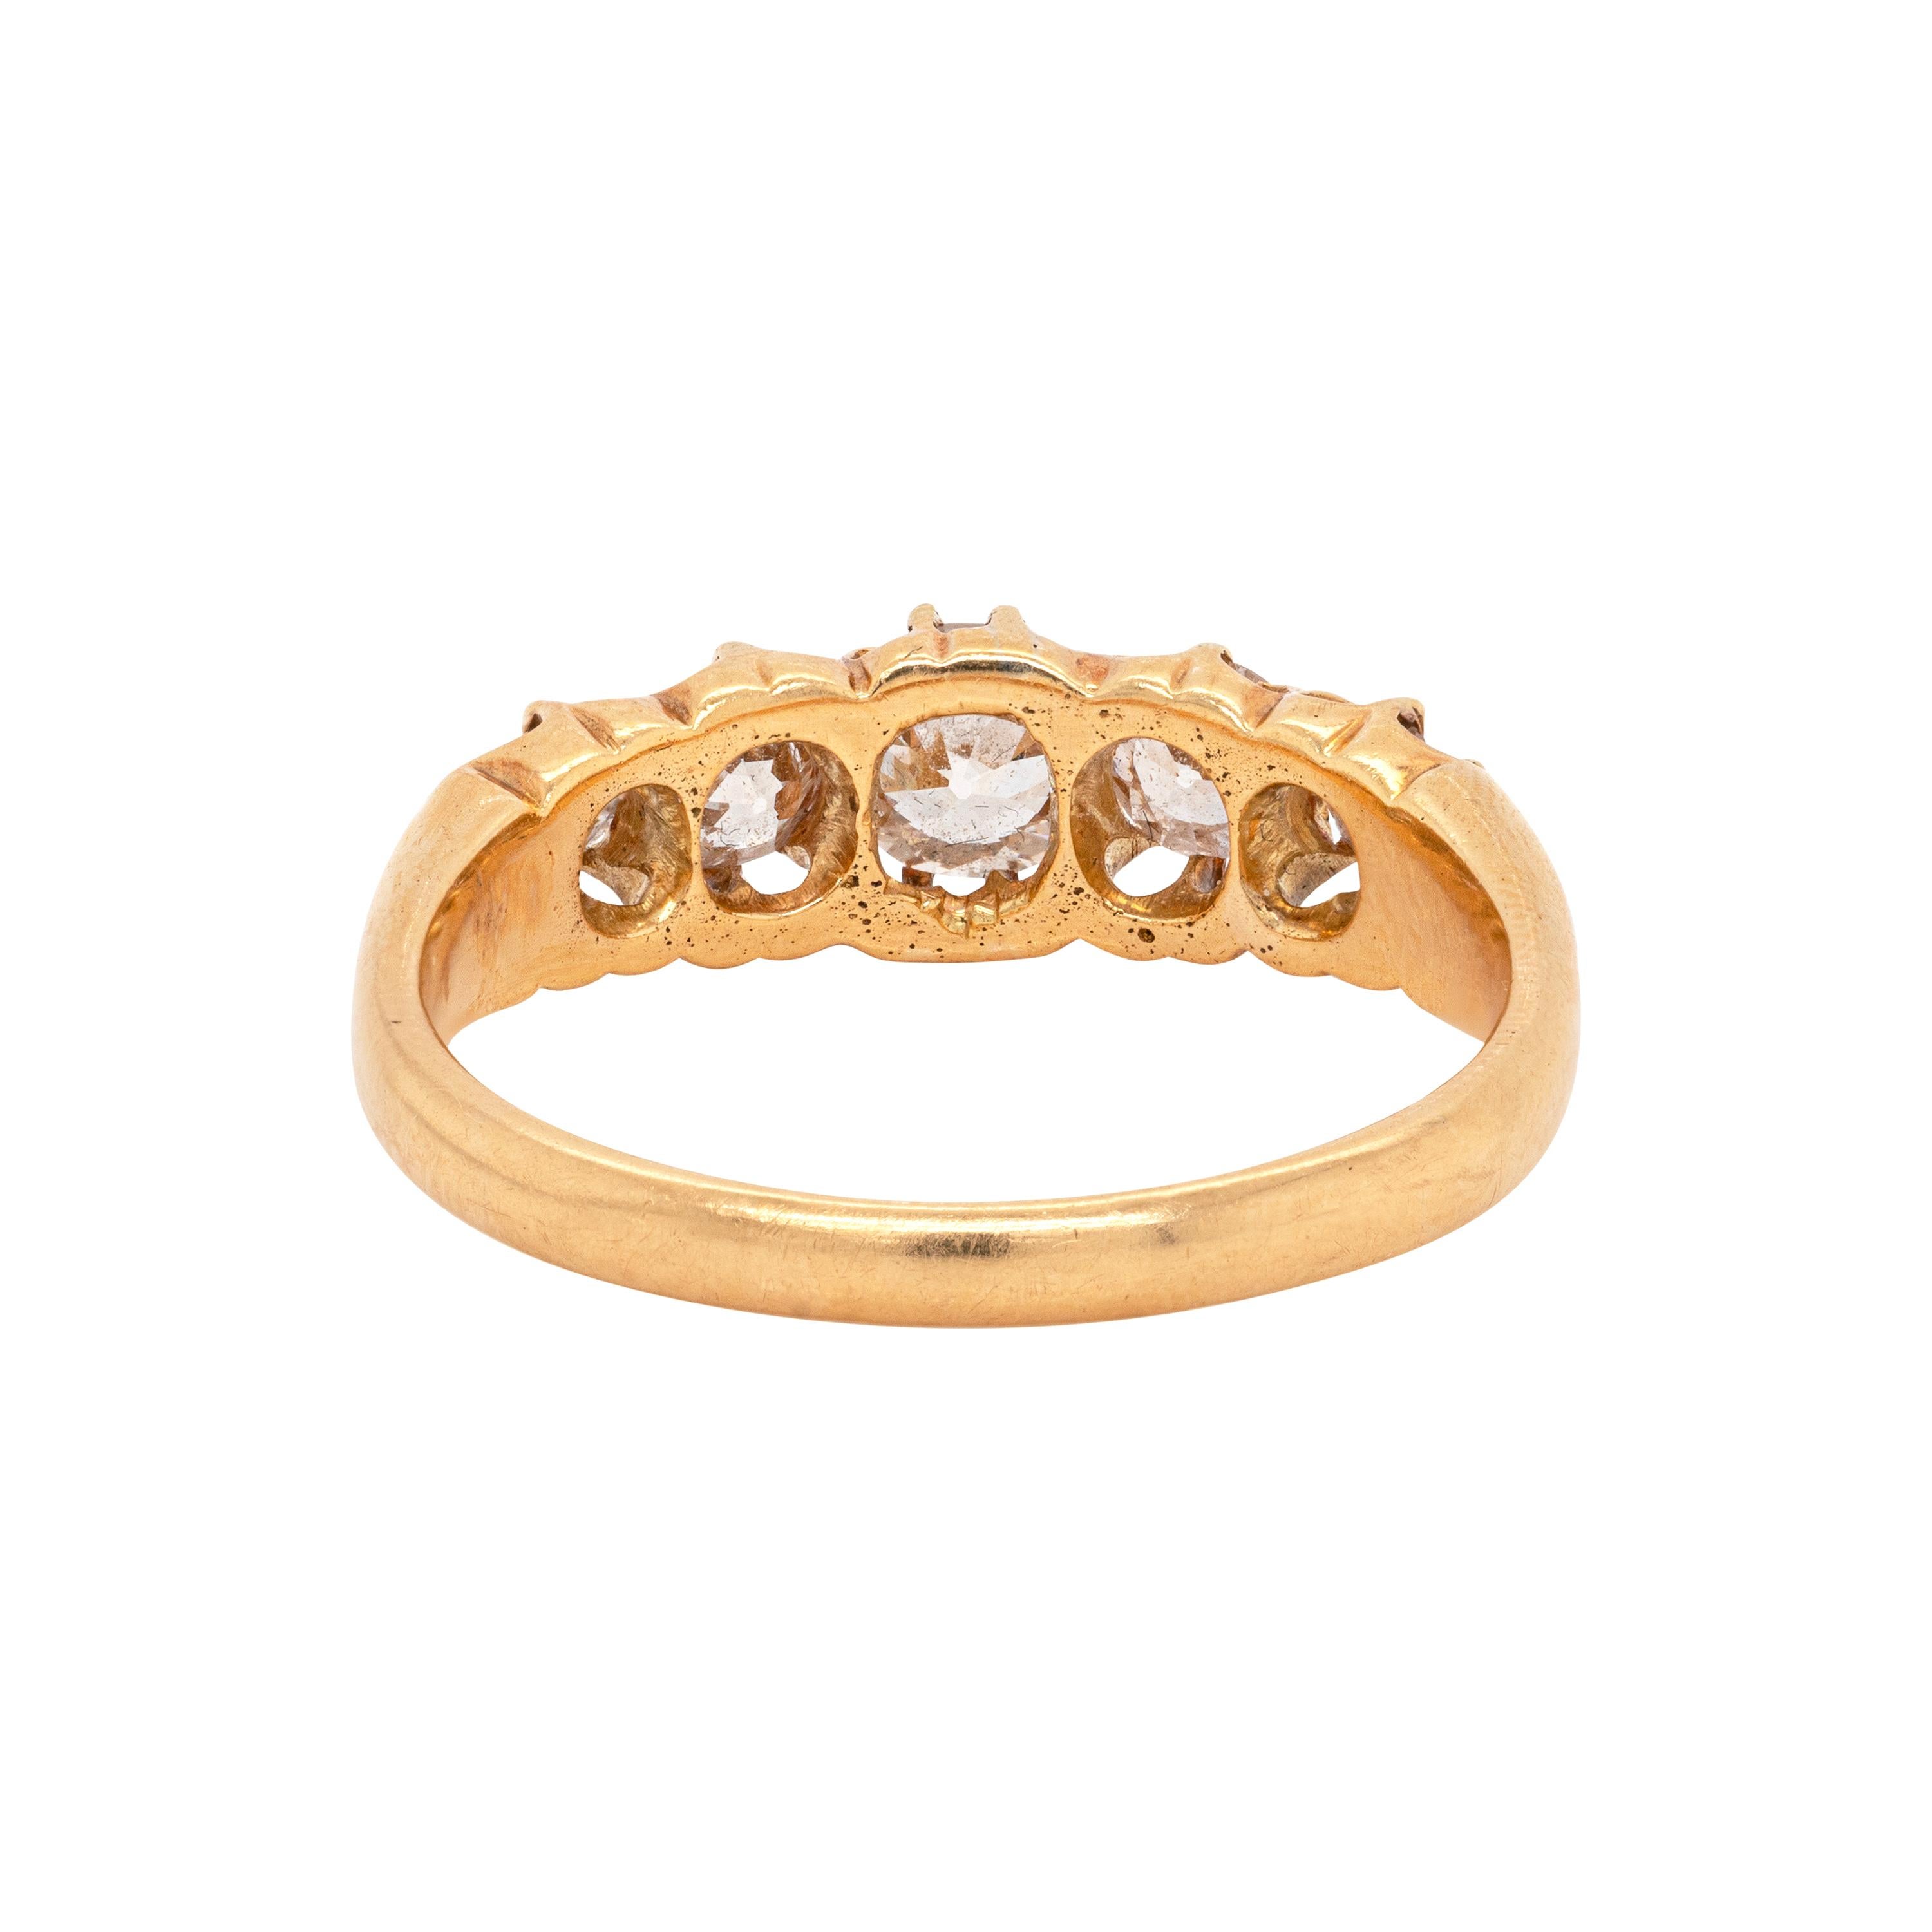 This antique Edwardian carved ring features five old cut diamonds with an approximate total weight of 1.20ct, all securely claw set in an open back 18 carat yellow gold setting. Five stone rings are said to represent the five qualities of a good